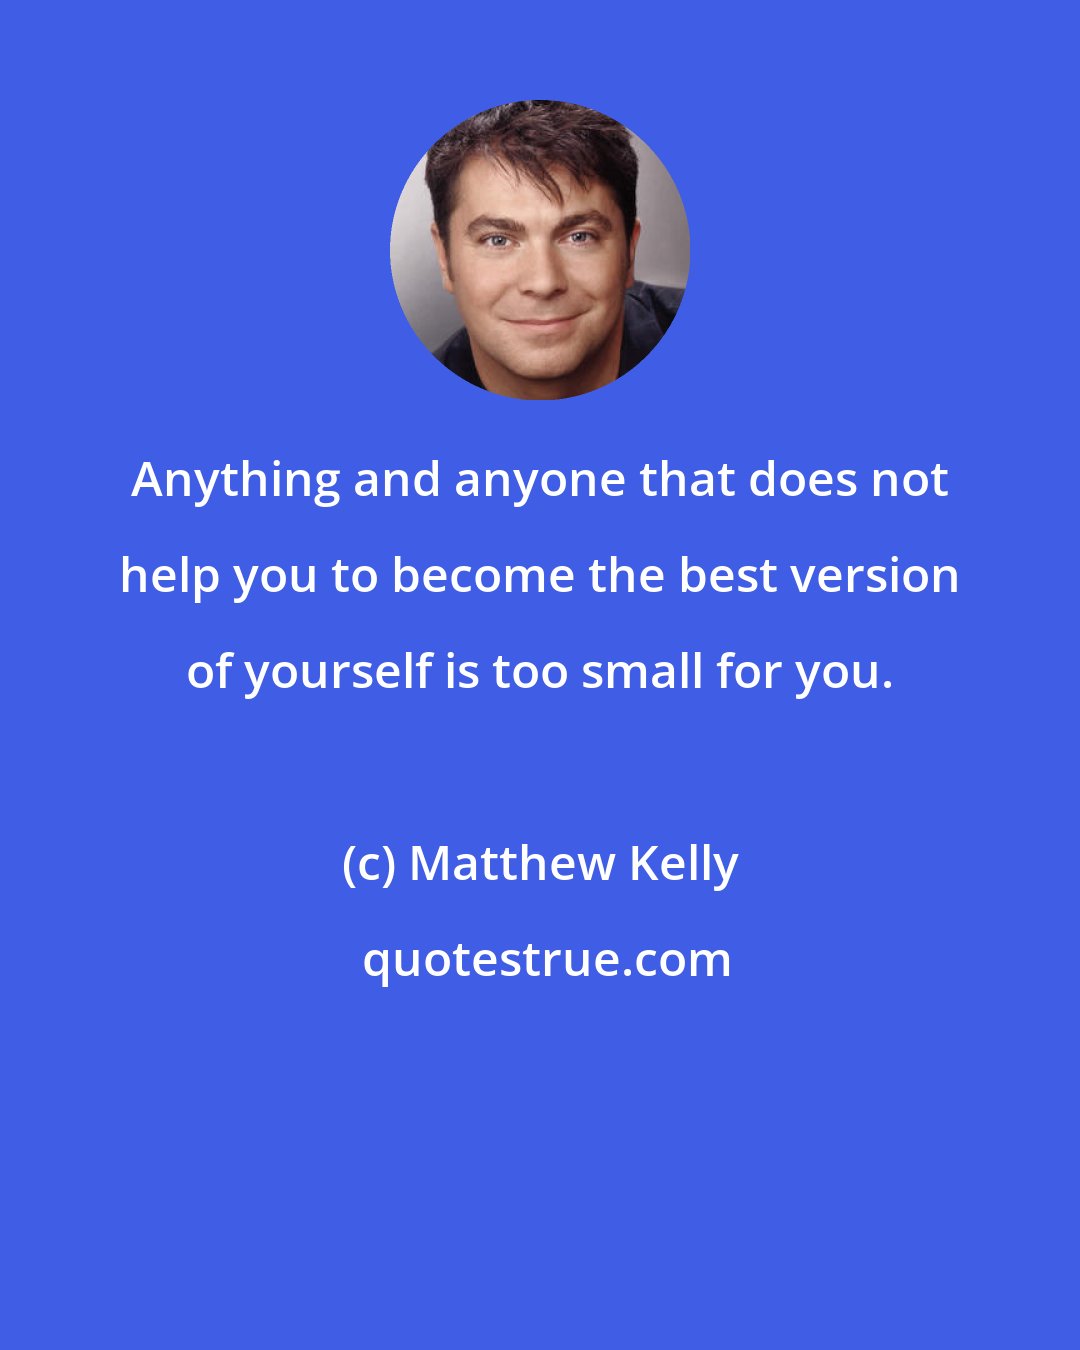 Matthew Kelly: Anything and anyone that does not help you to become the best version of yourself is too small for you.